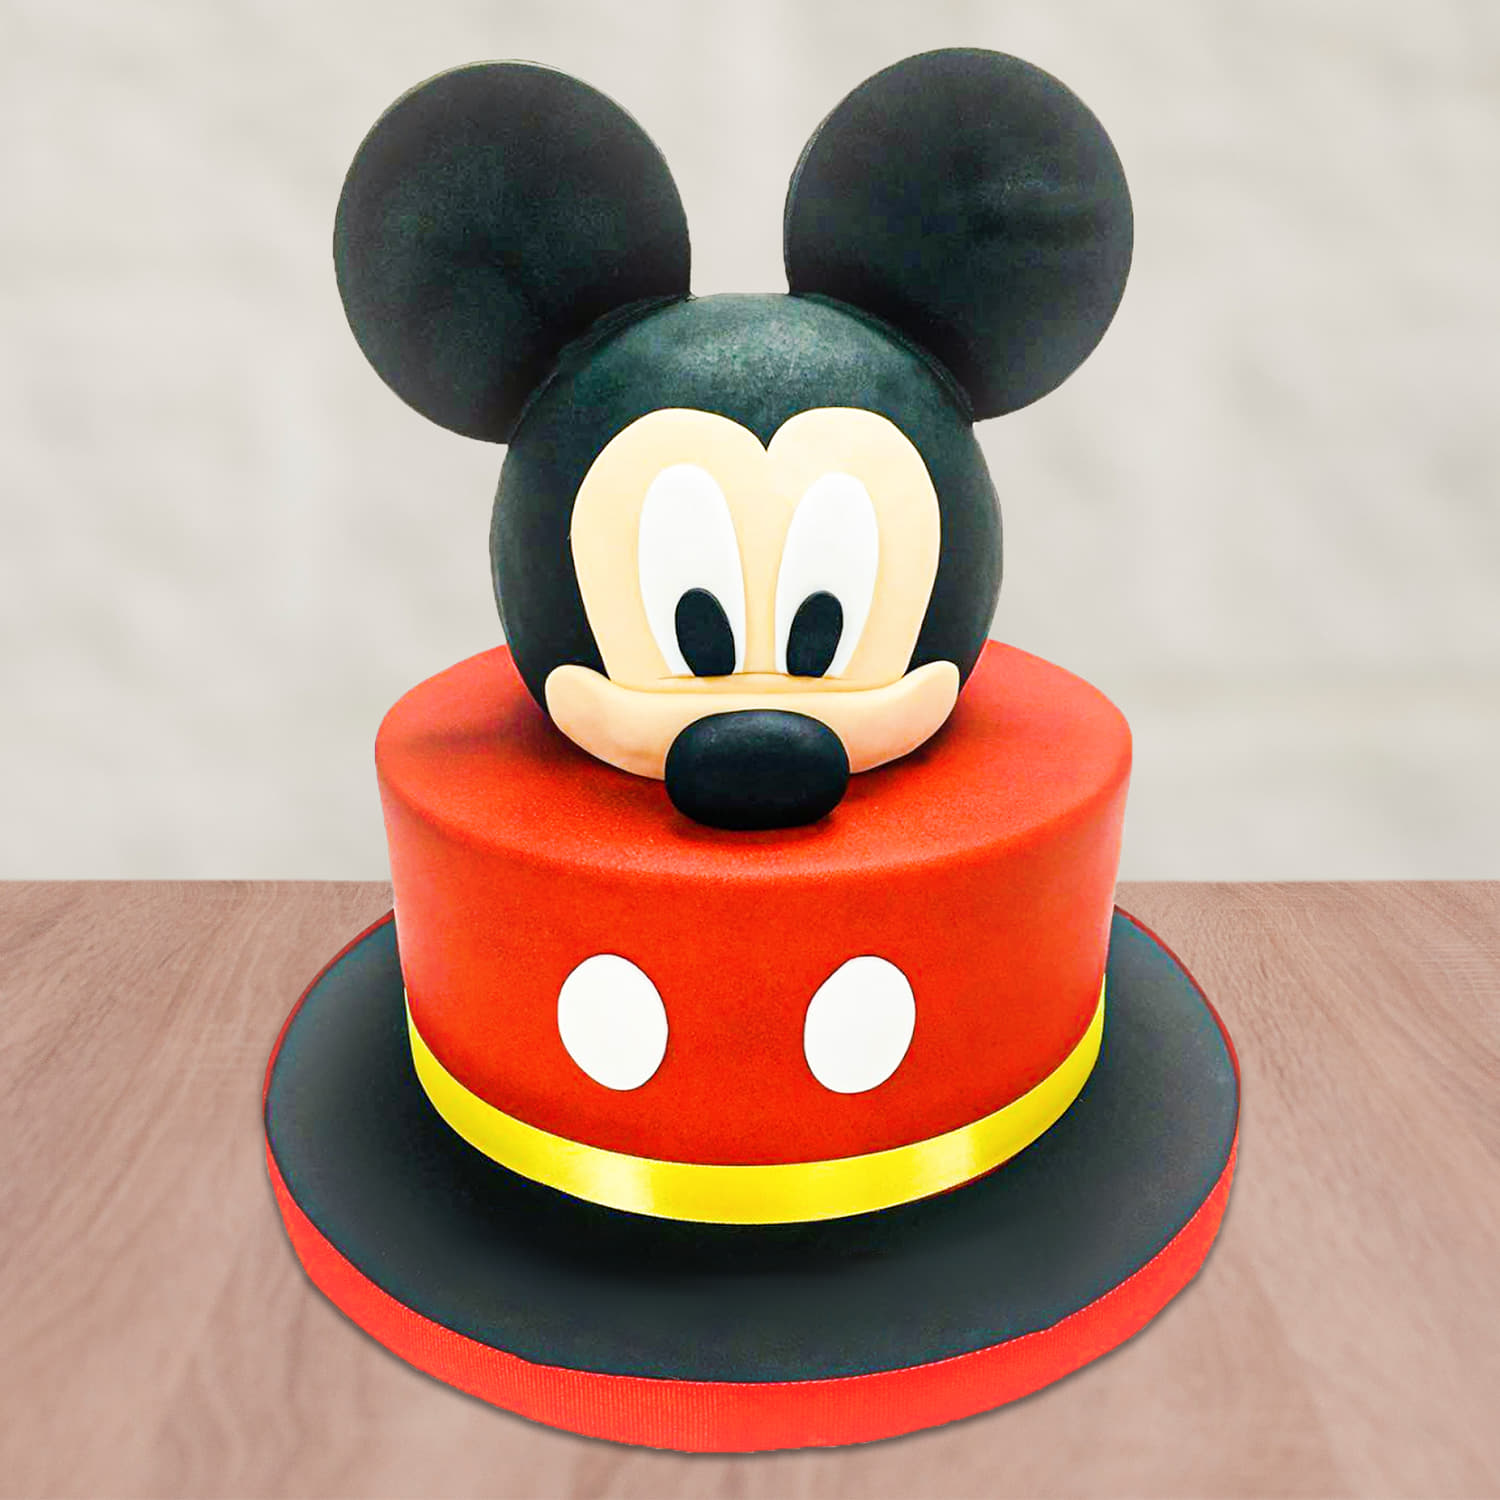 M341) Mickey Mouse Theme Tow Tier Cake (2 Kg). – Tricity 24